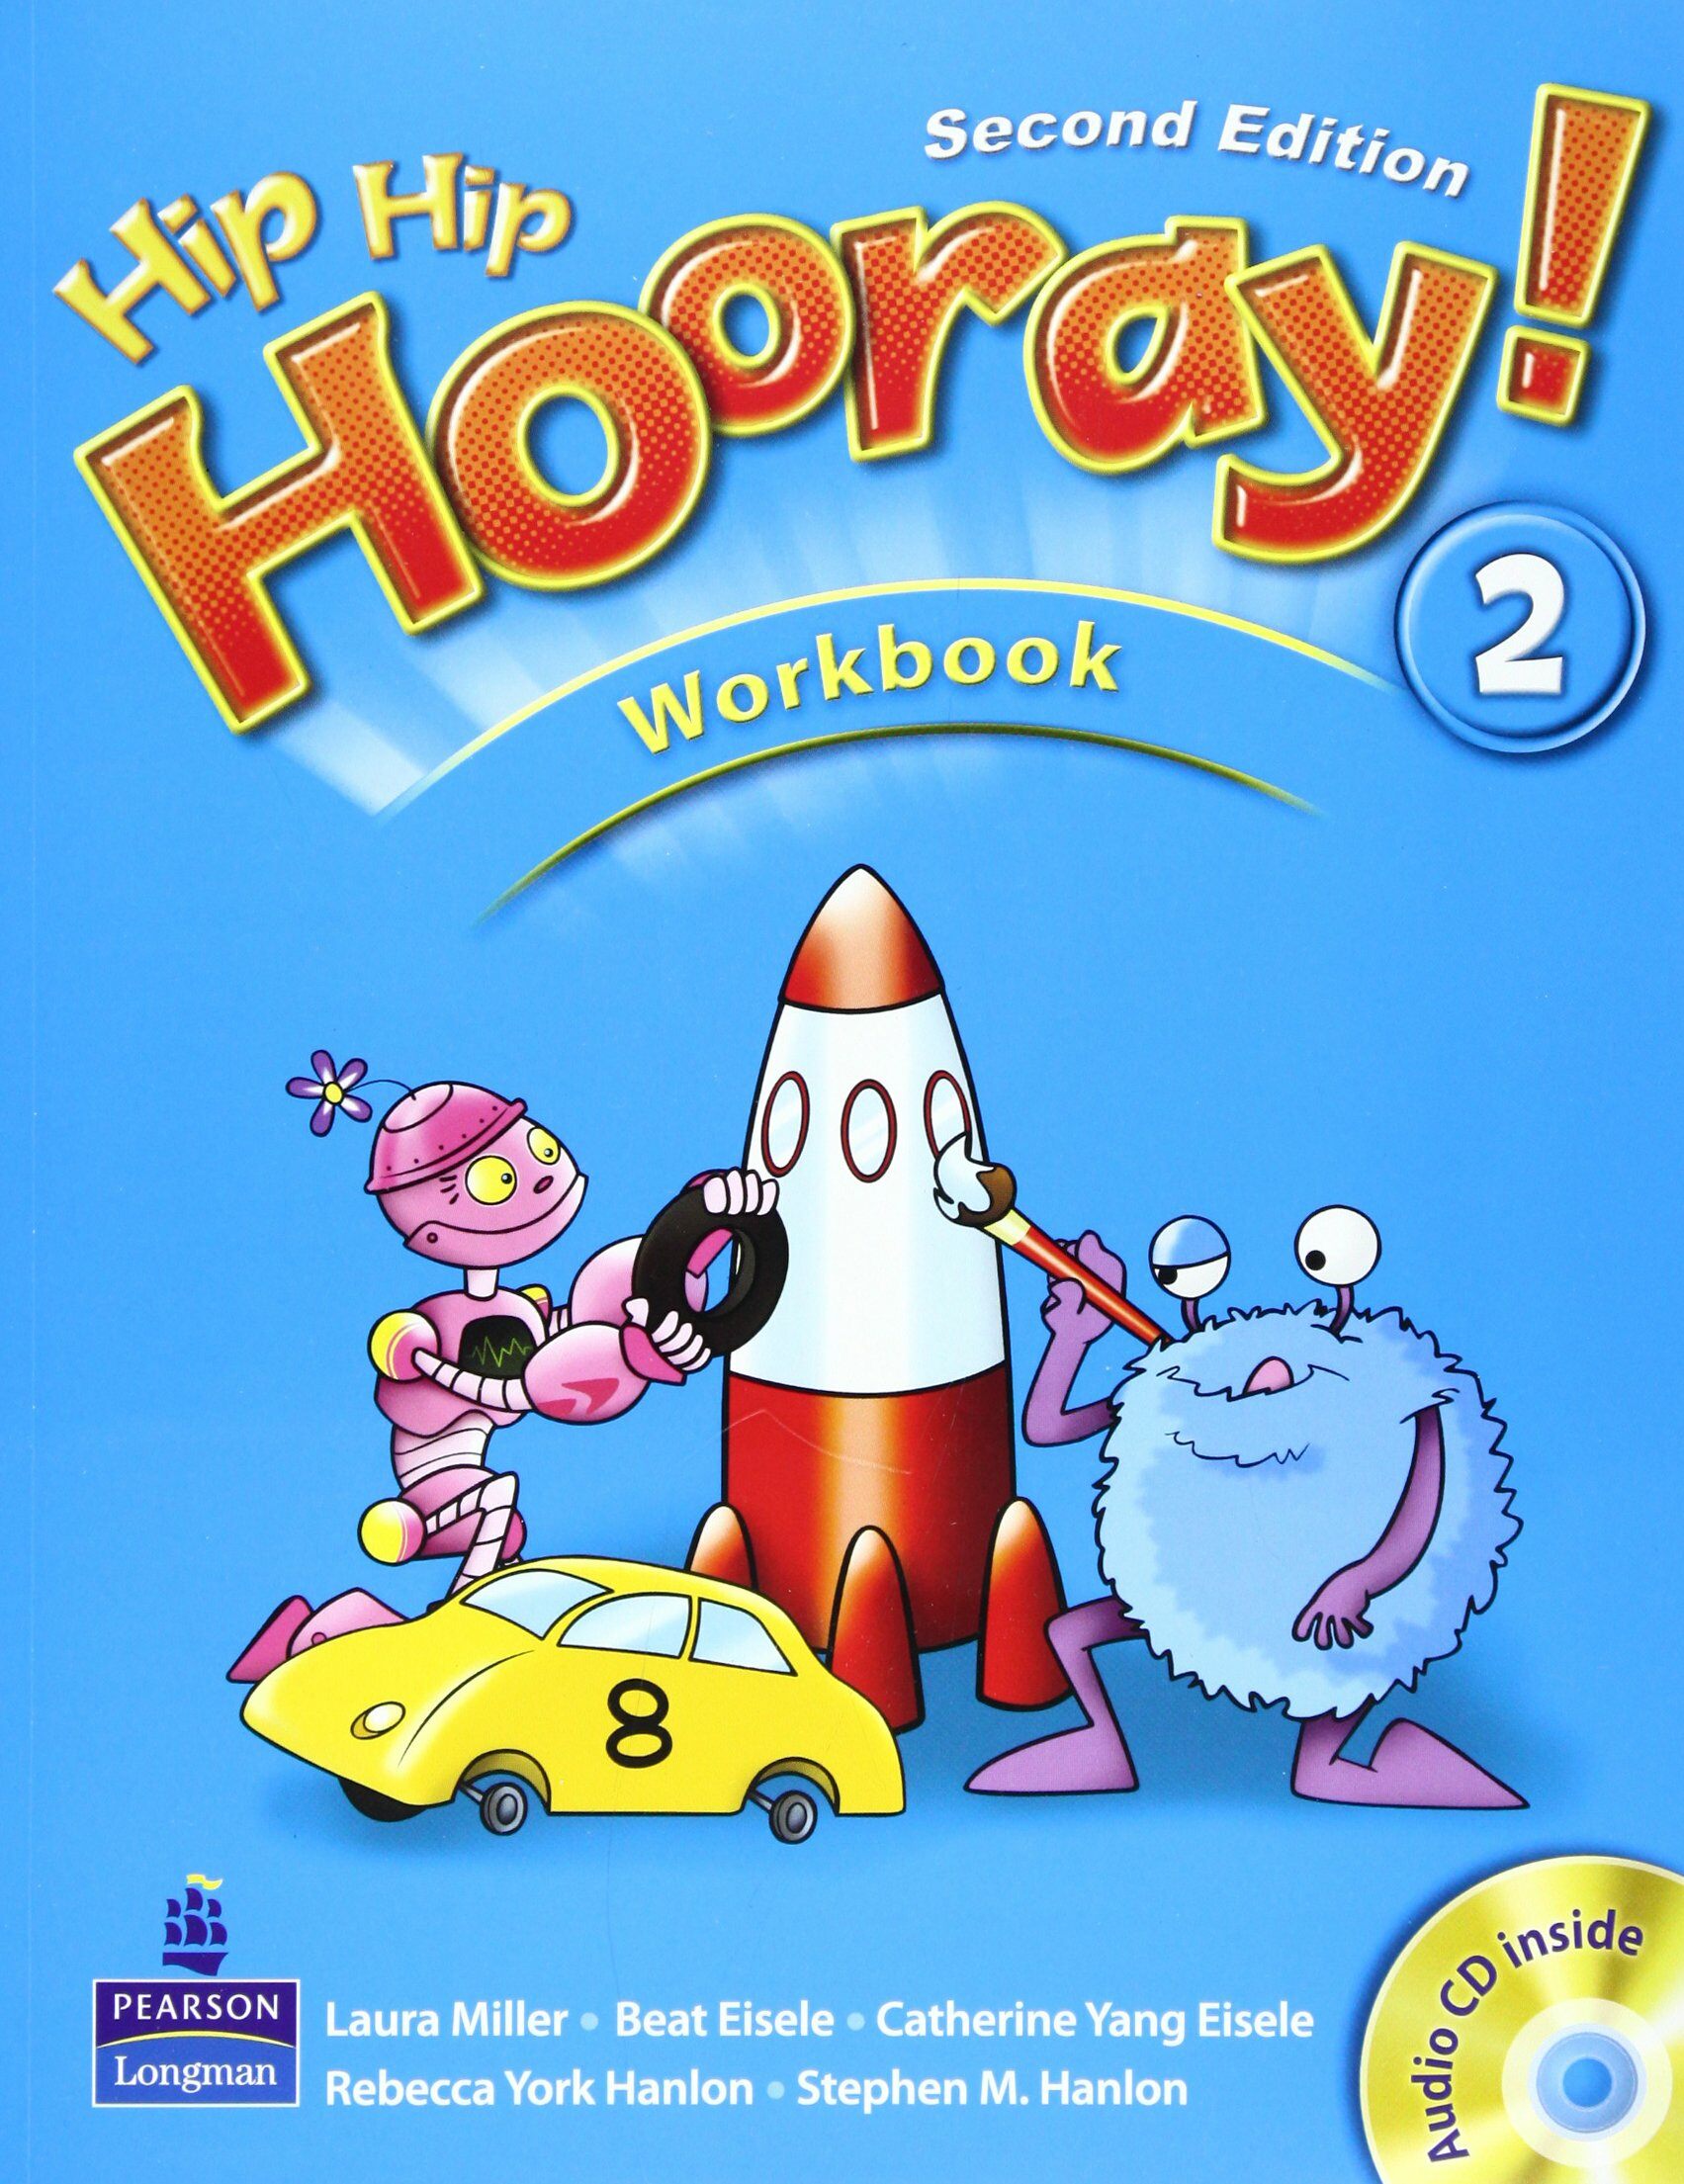 Hip Hip Hooray! 2 : Workbook (Paperback + CD, 2nd Edition / for ASIA)